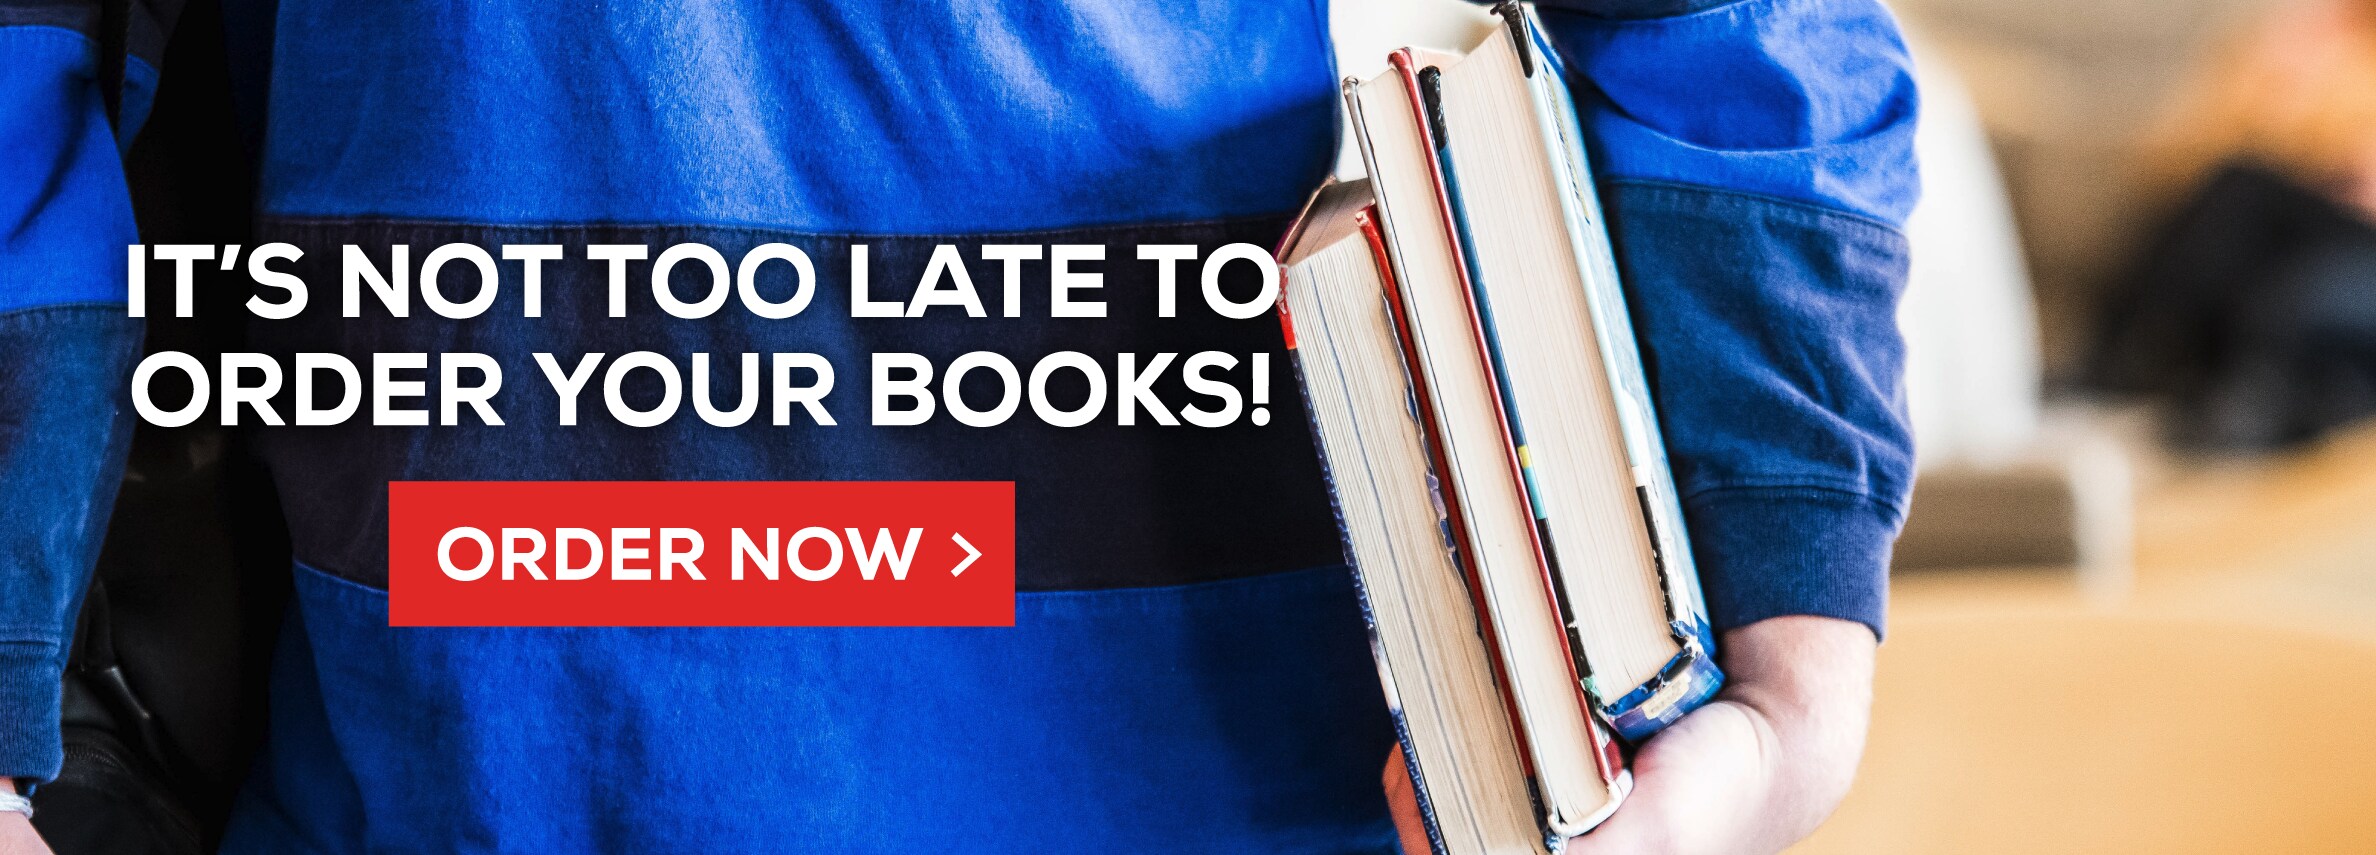 It's not too late to order your books! Order Now.